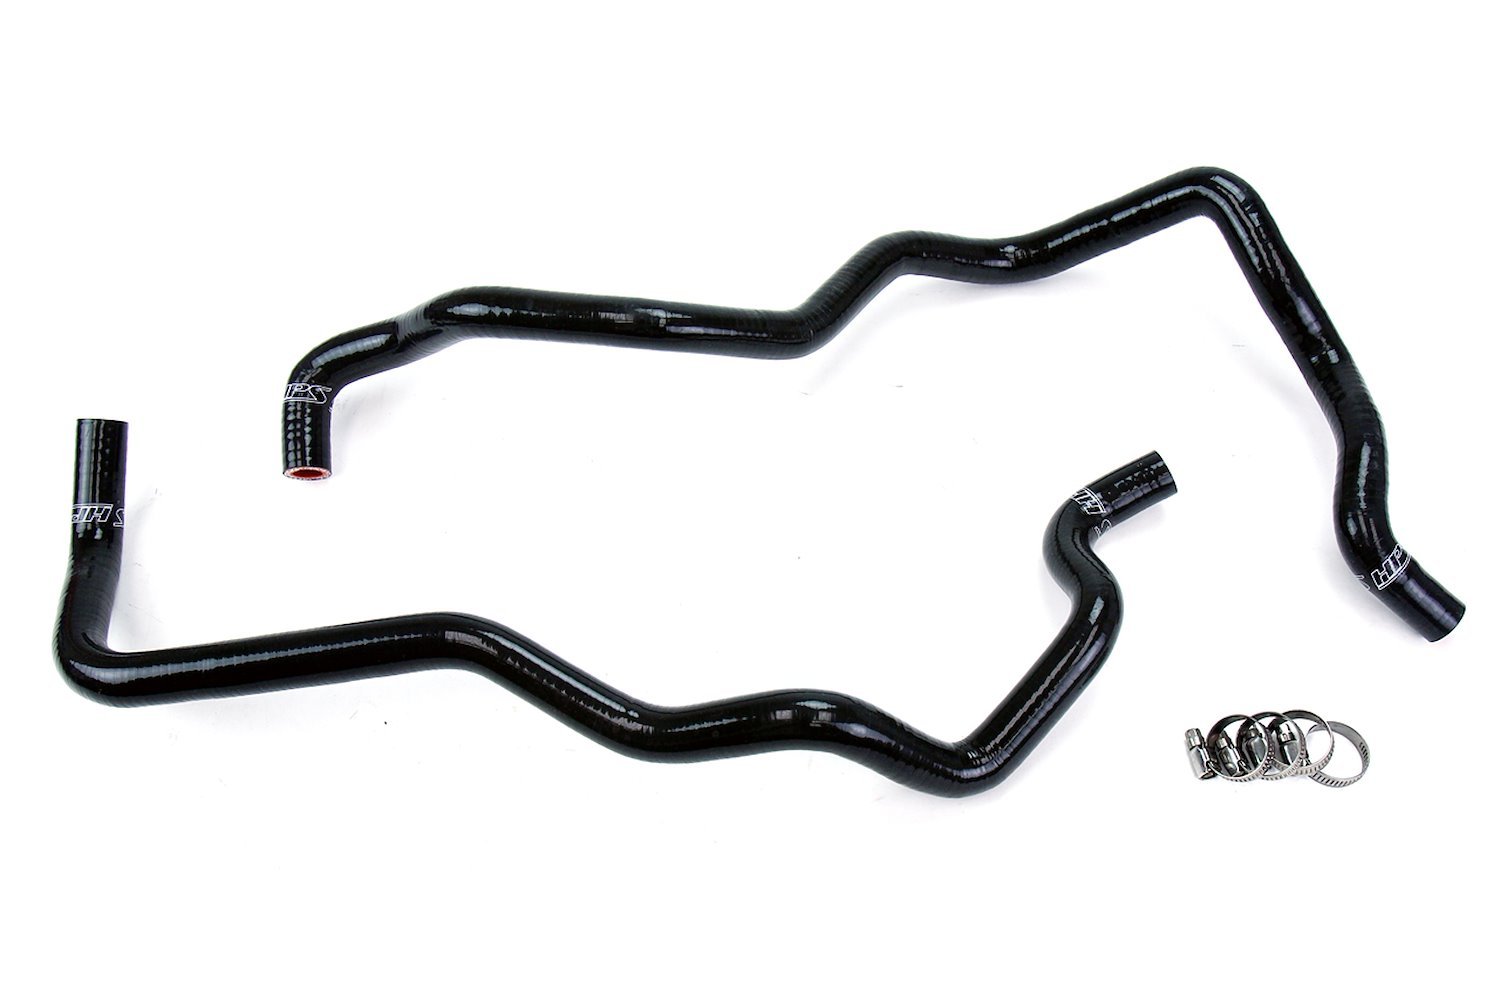 57-1220H-BLK Heater Hose Kit, High-Temp 3-Ply Reinforced Silicone, Replace OEM Rubber Heater Coolant Hoses